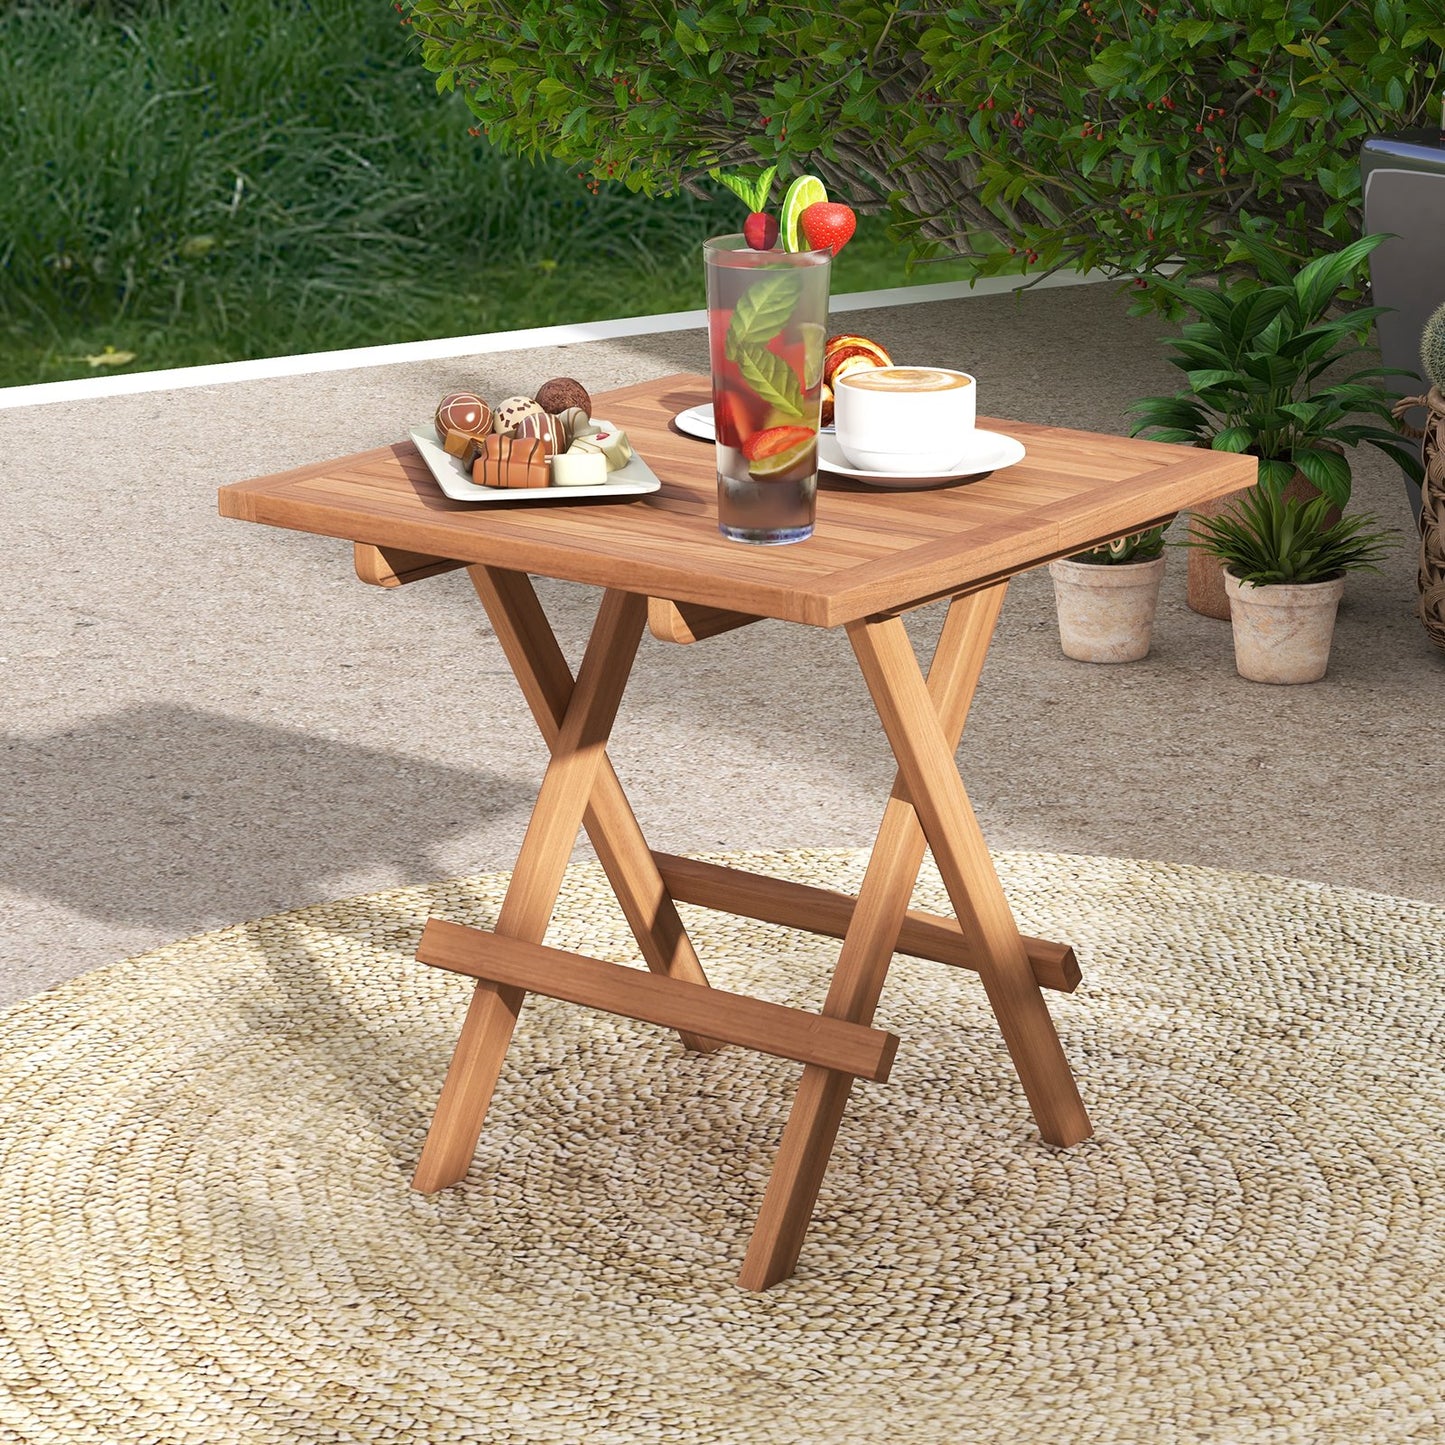 Square Patio Folding Table Indonesia Teak Wood with Slatted Tabletop Portable for Picnic, Natural